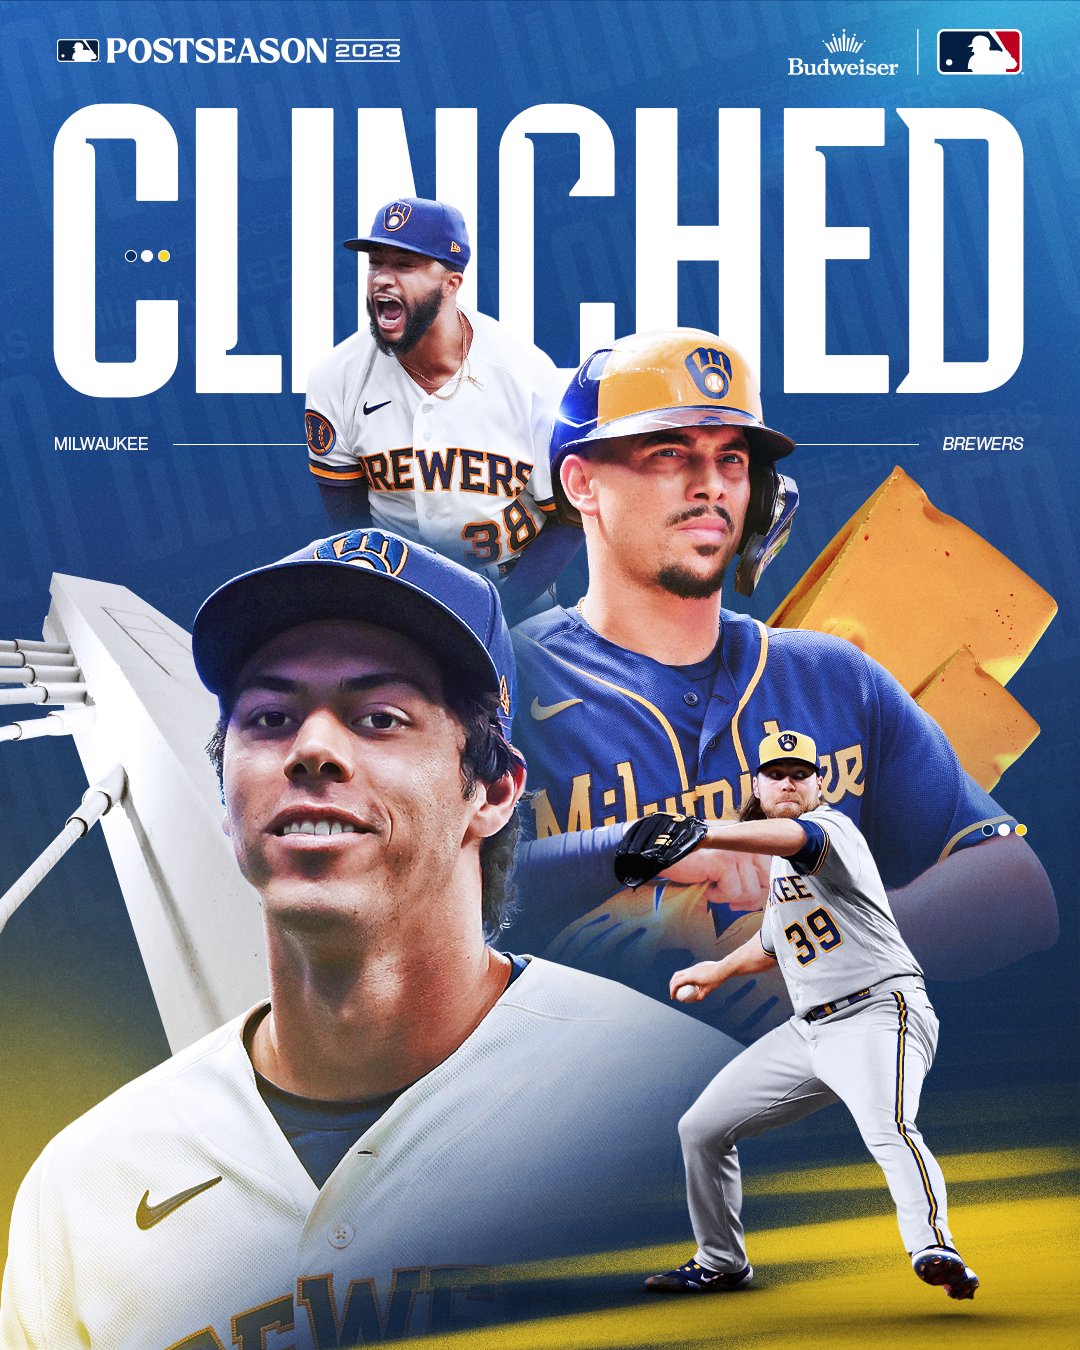 MLB on X: For the 5th time in 6 seasons, the @Brewers are headed